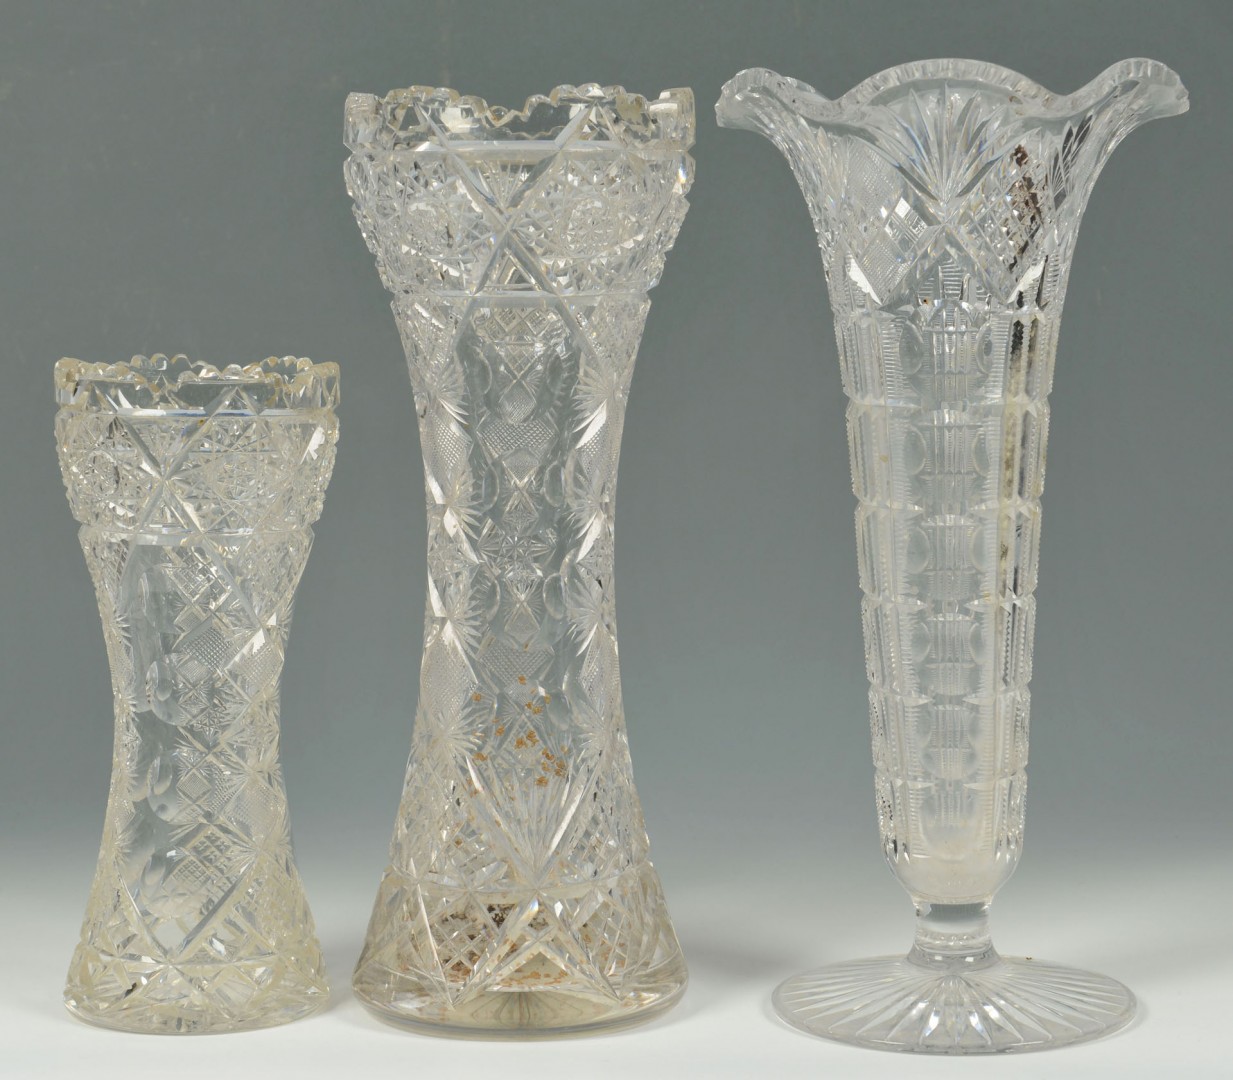 Lot 628: Grouping of 10 cut glass items